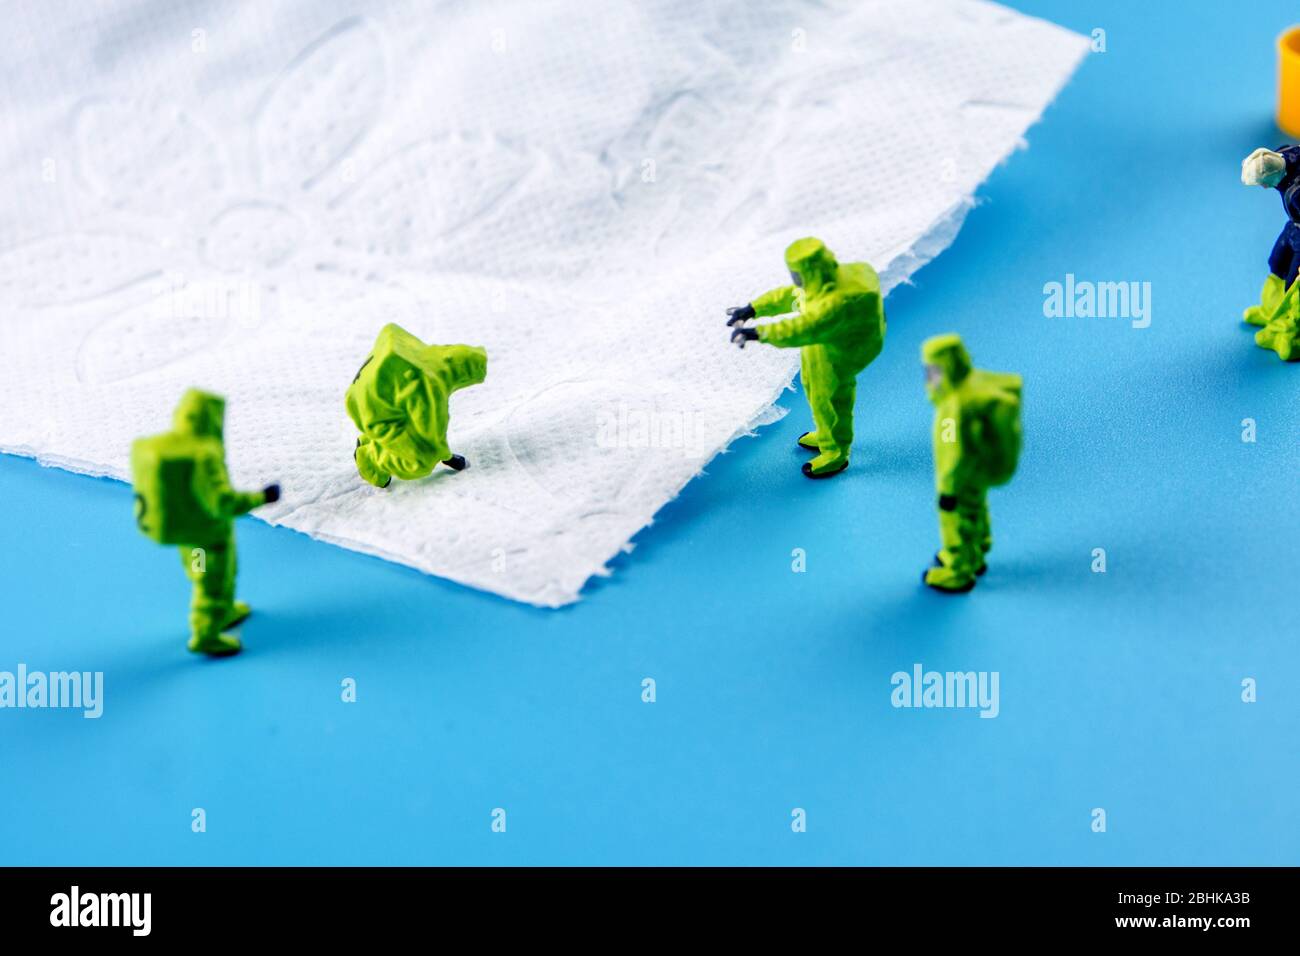 a team of miniature figurines checking a cleanliness of toilet paper, very important to make a desinfection of lavatory and other possibly dirty place Stock Photo